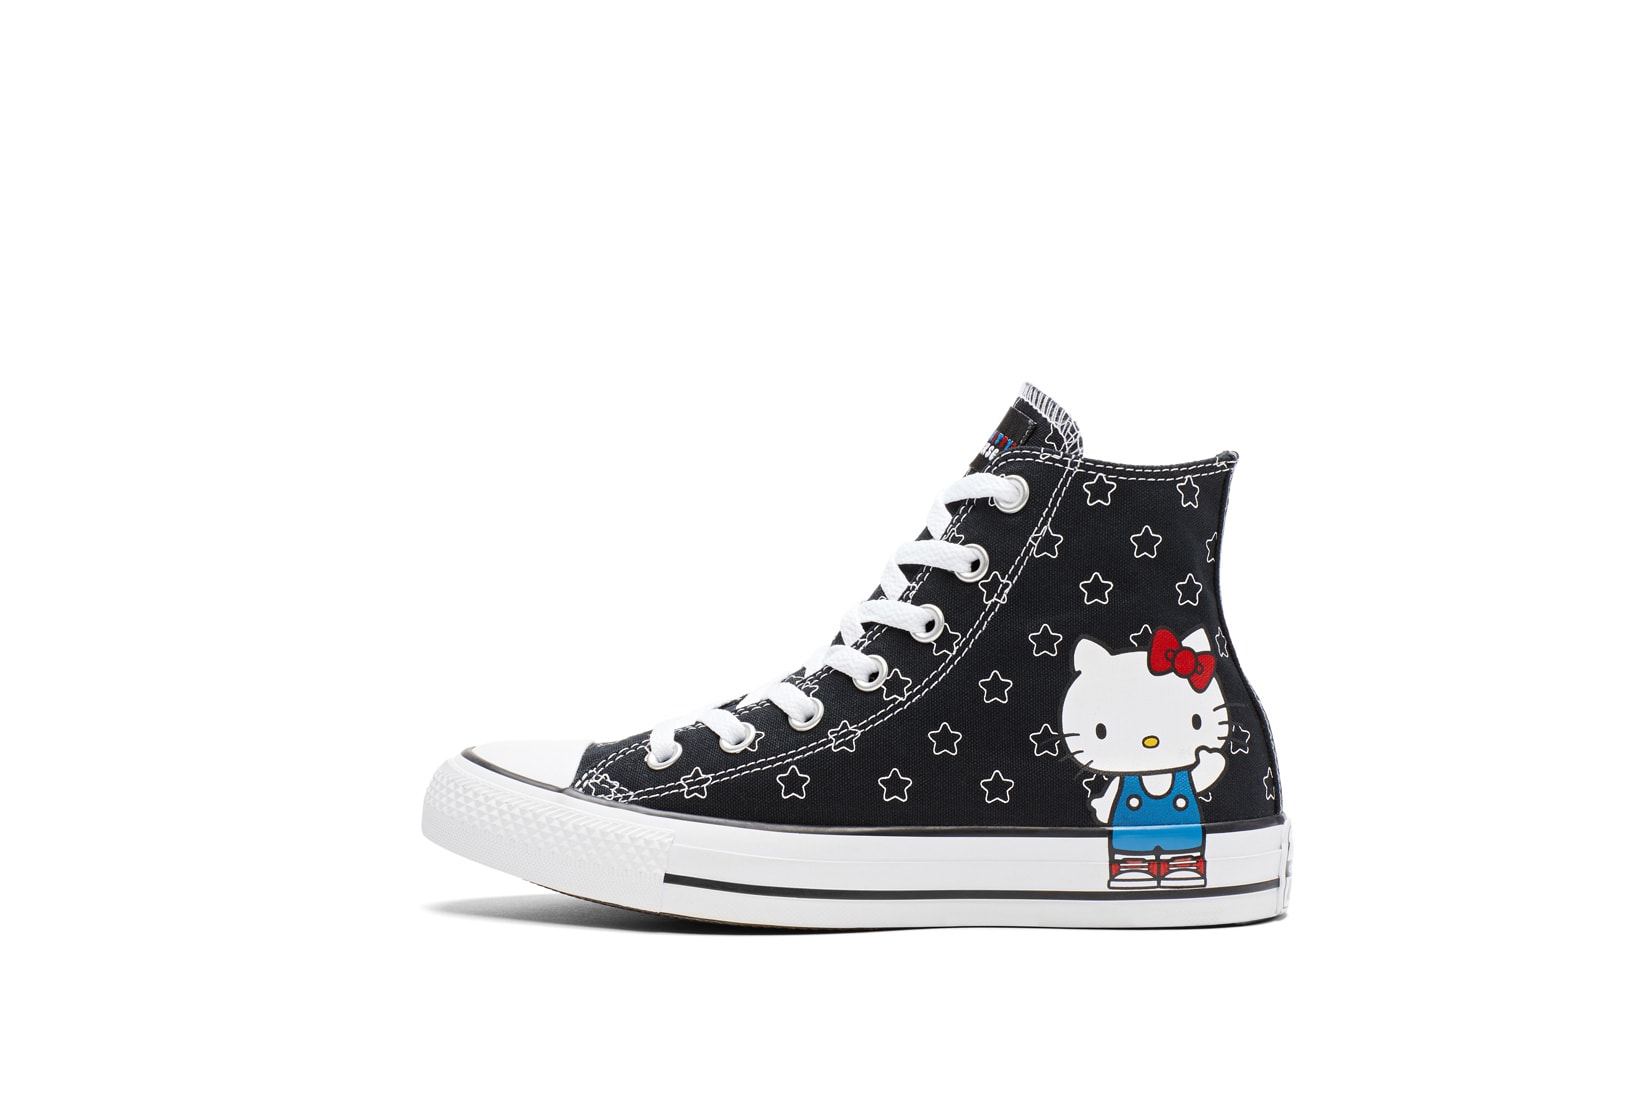 Converse x Hello Kitty Collaboration One Star Chuck Taylor Sneaker Shoe Print Graphic Cute